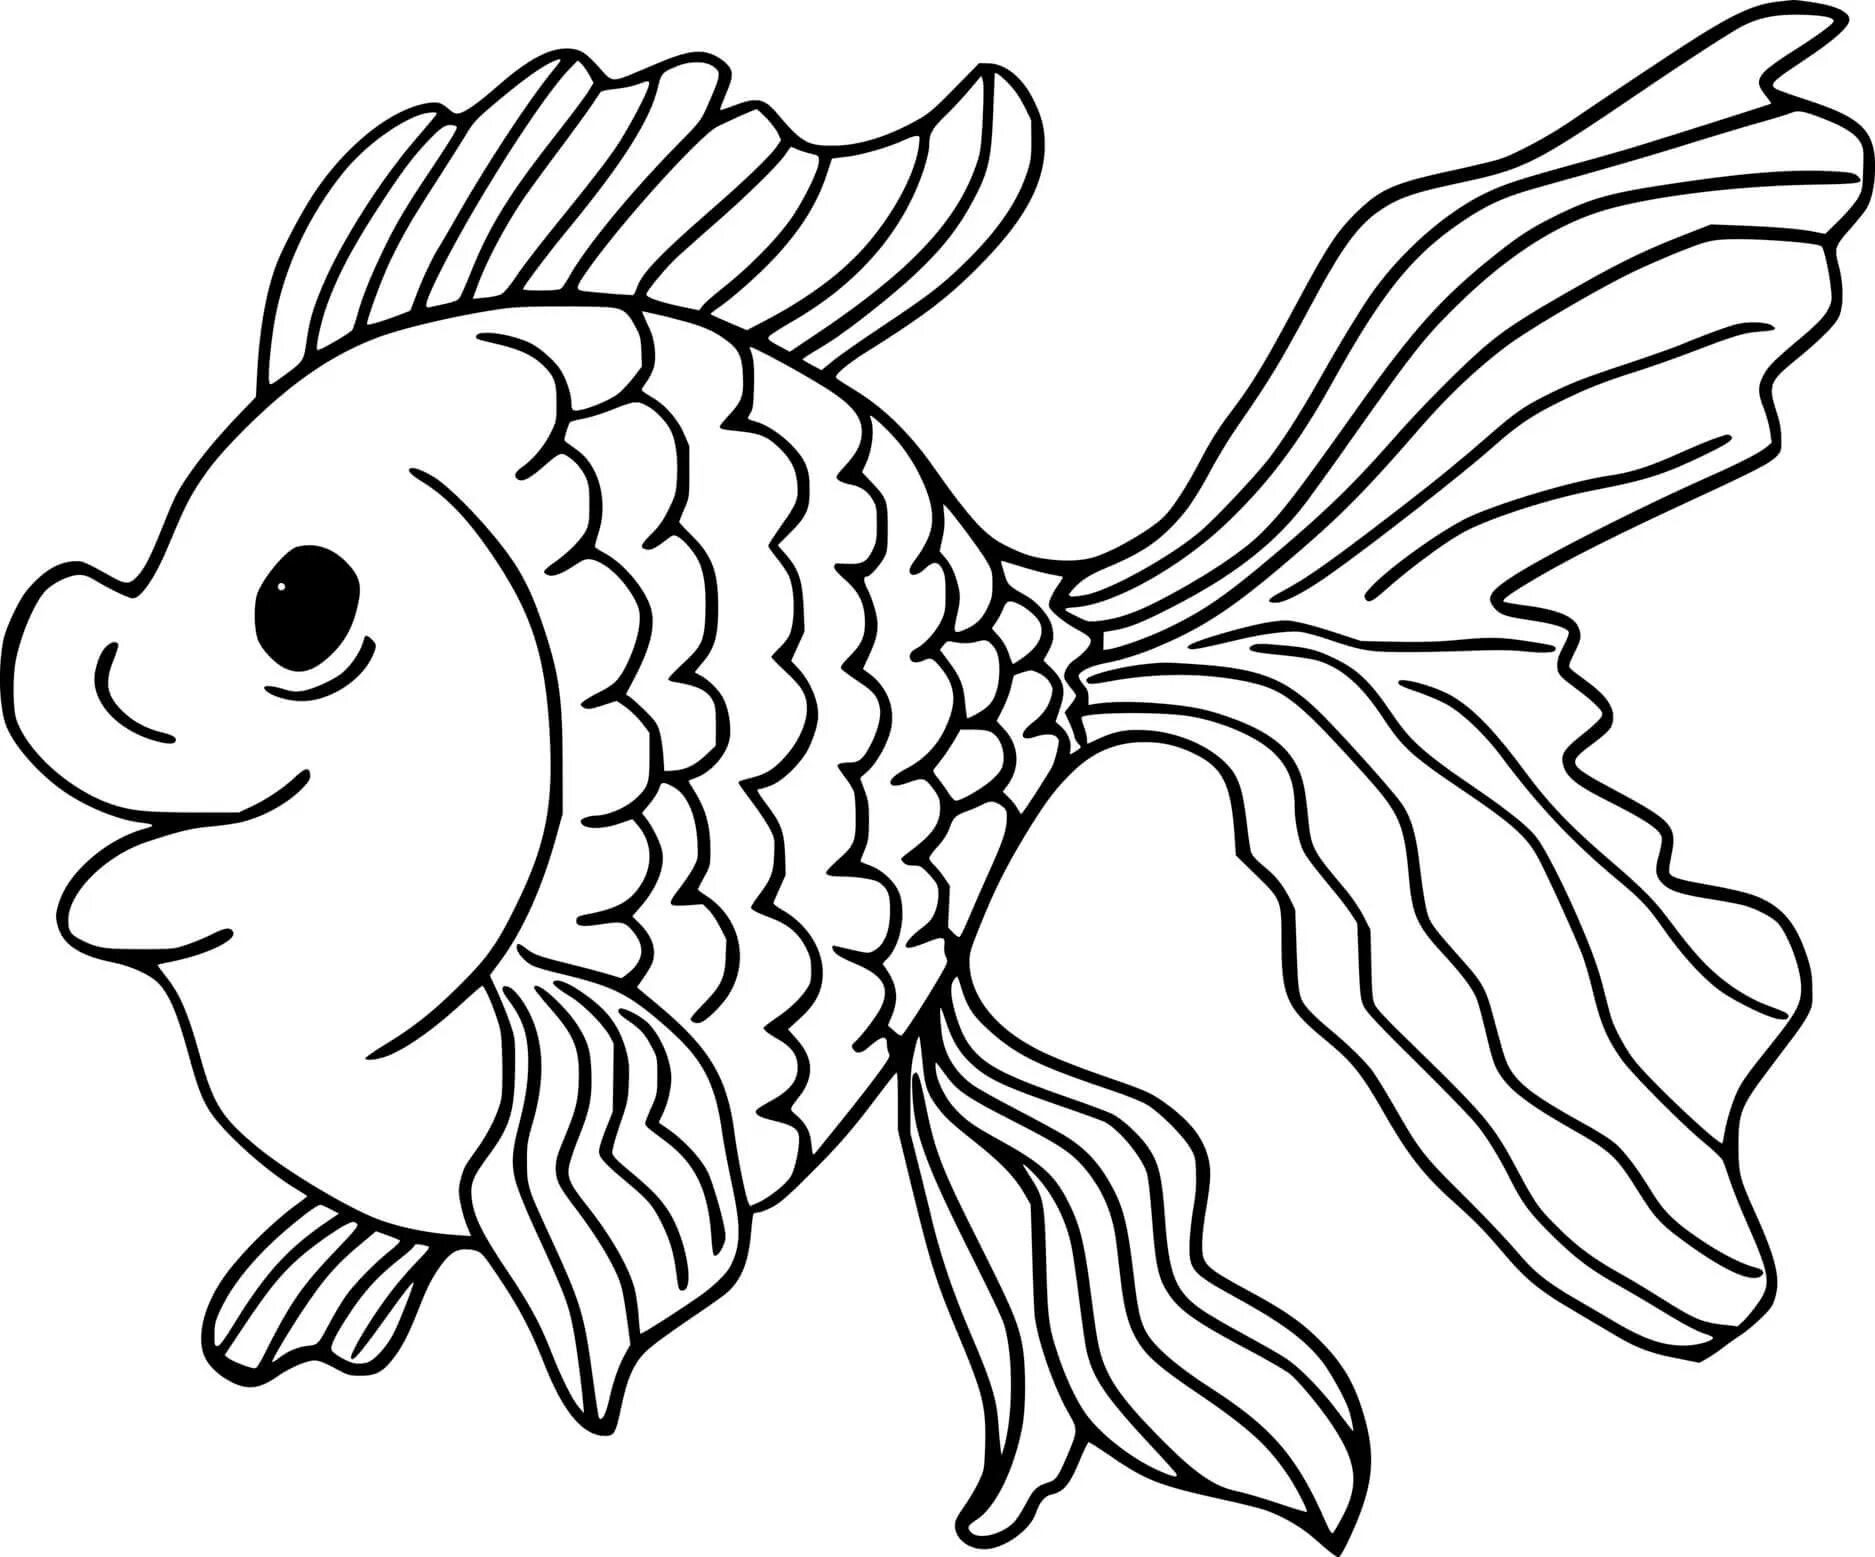 Coloring dazzling goldfish for kids